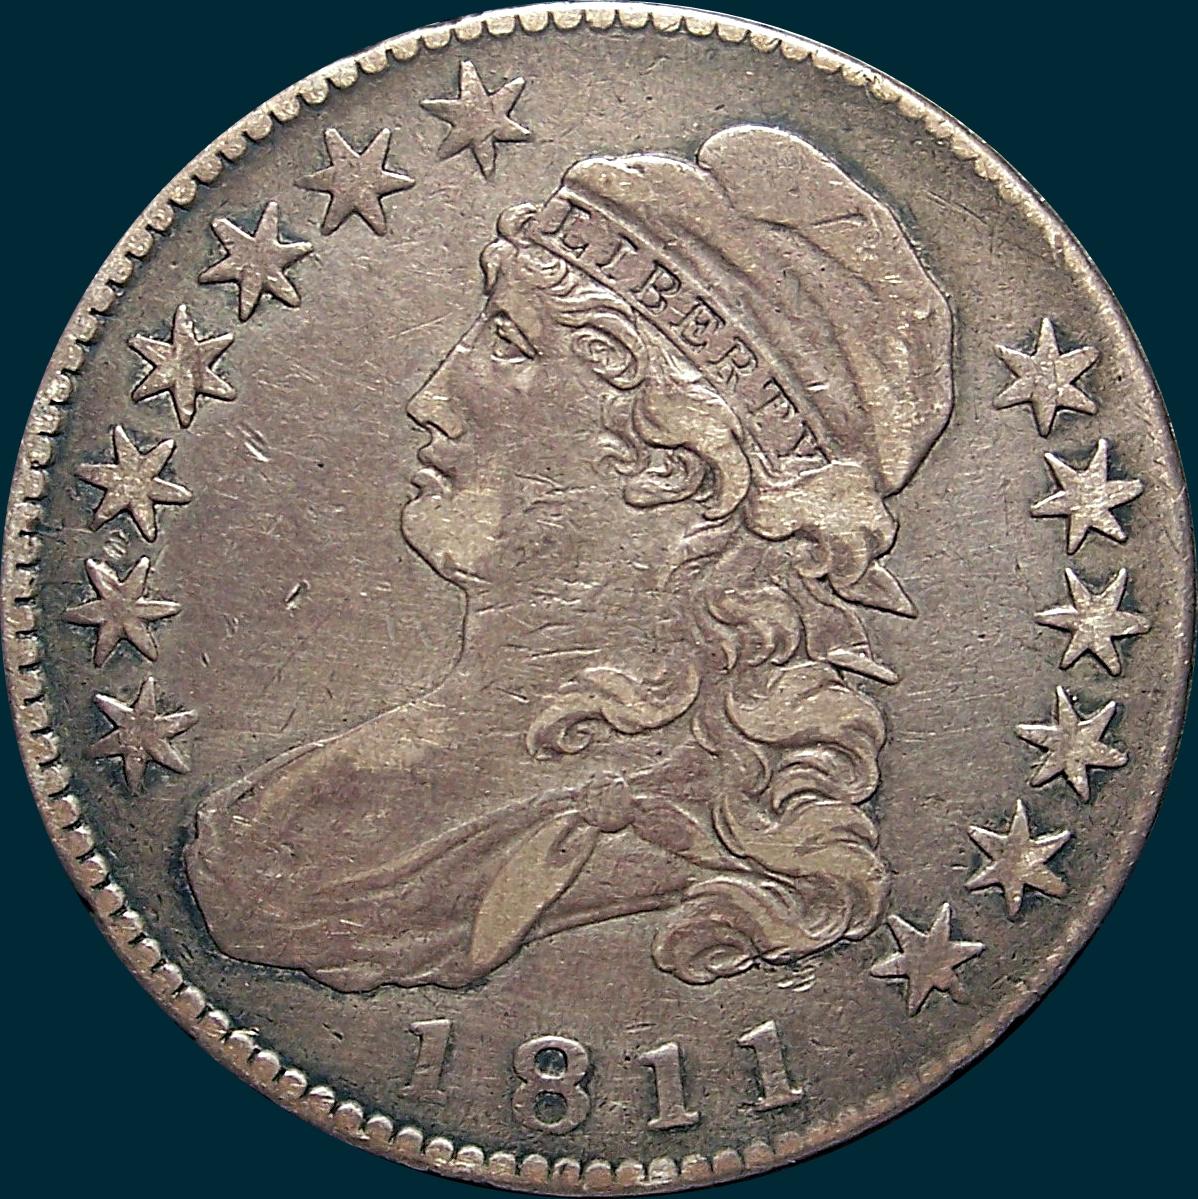 1811, O-104, Large 8, Capped Bust, Half Dollar